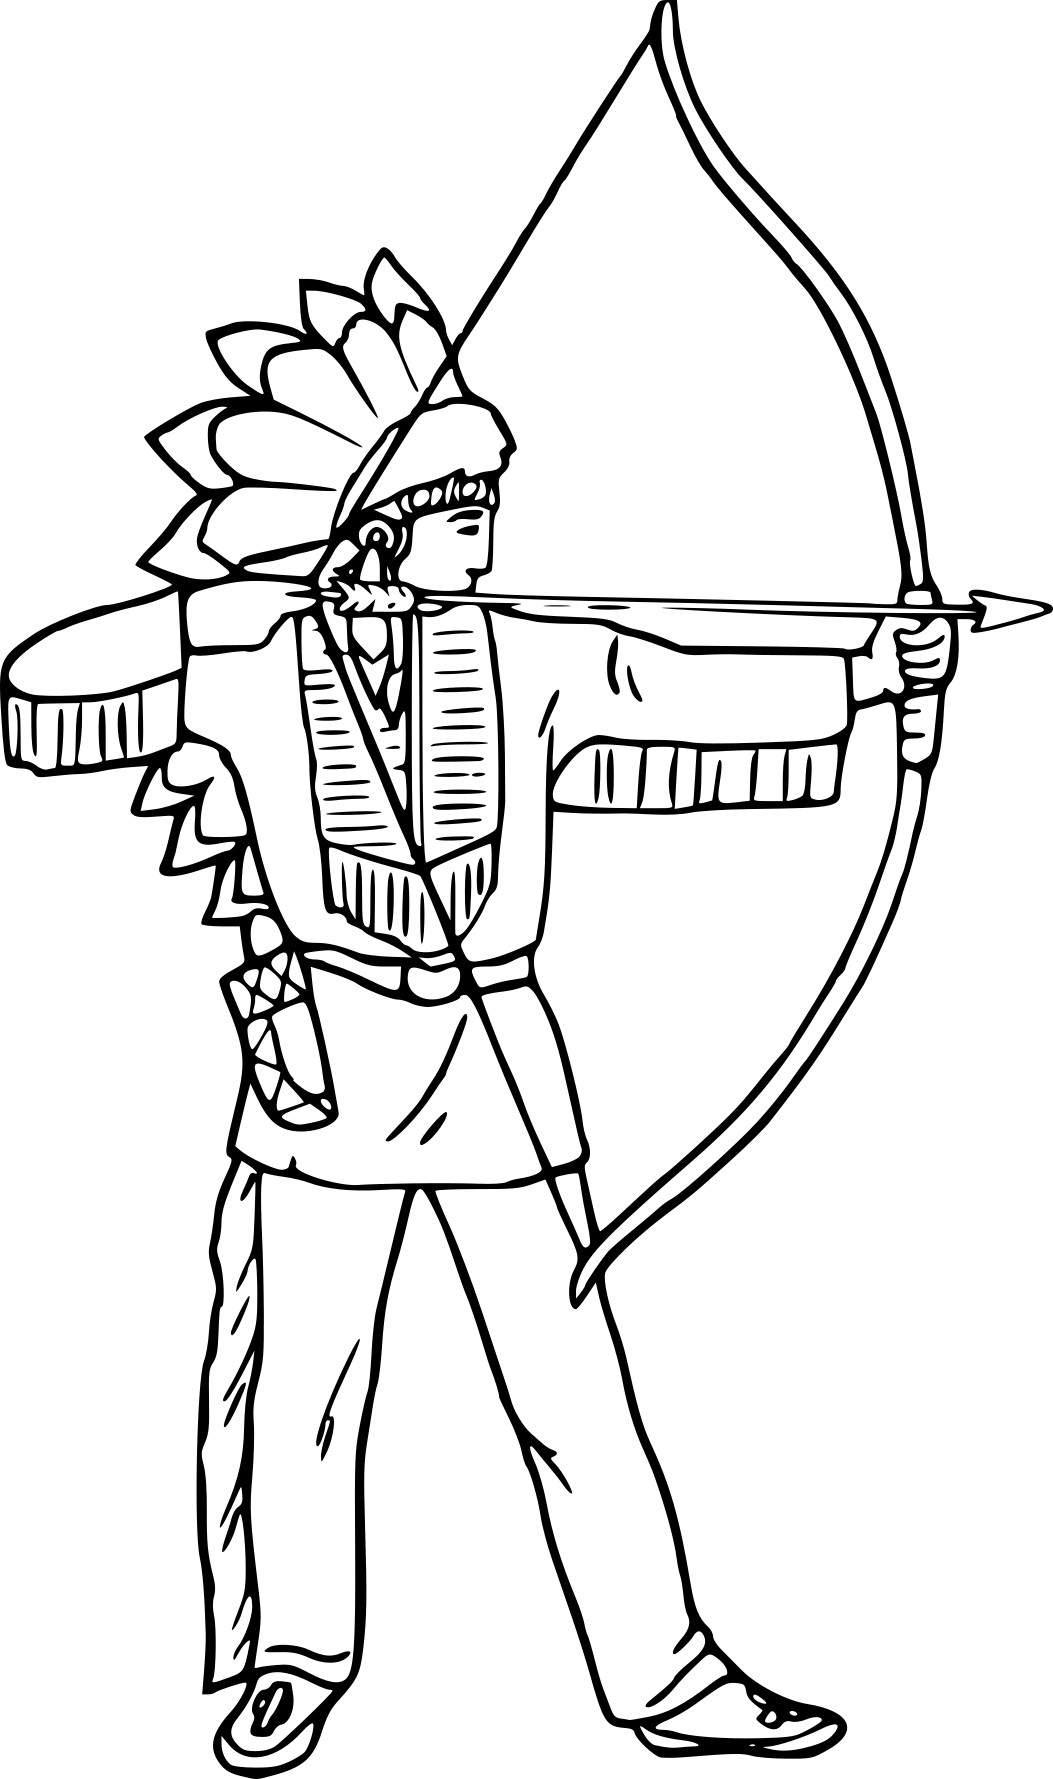 Indian With A Bow coloring page